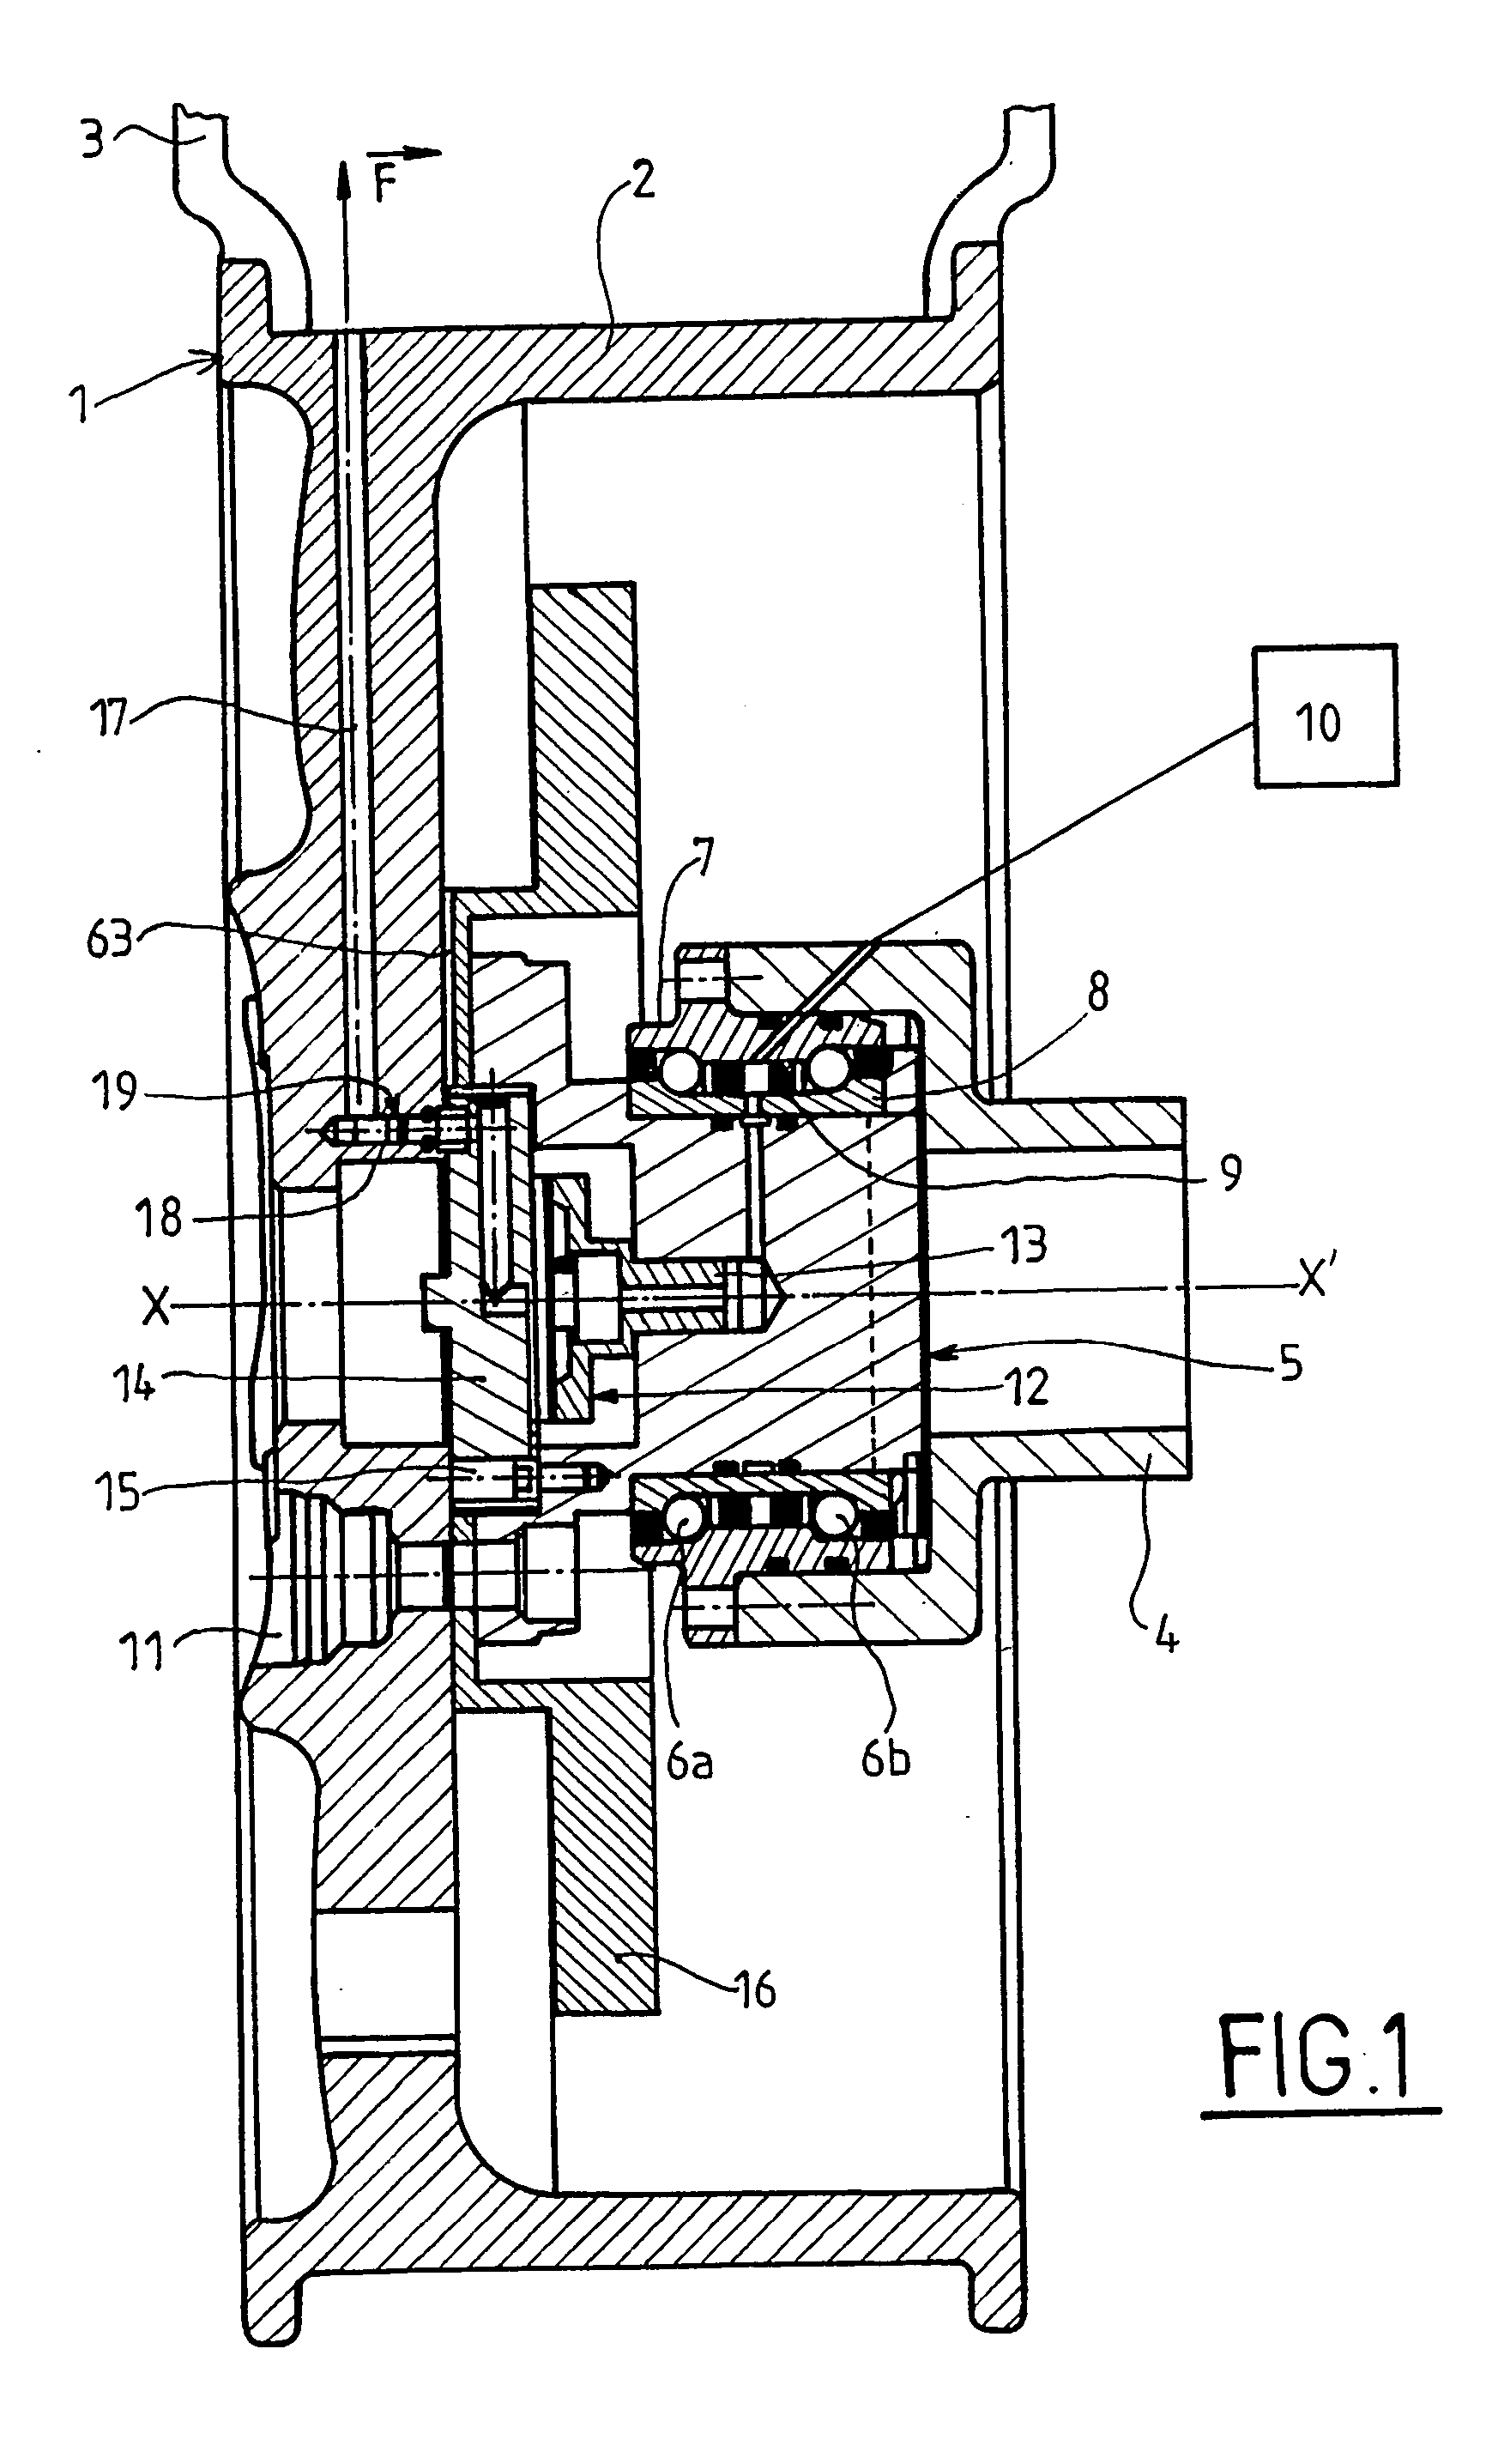 Tyre self-sealing device for the wheel of a vehicle